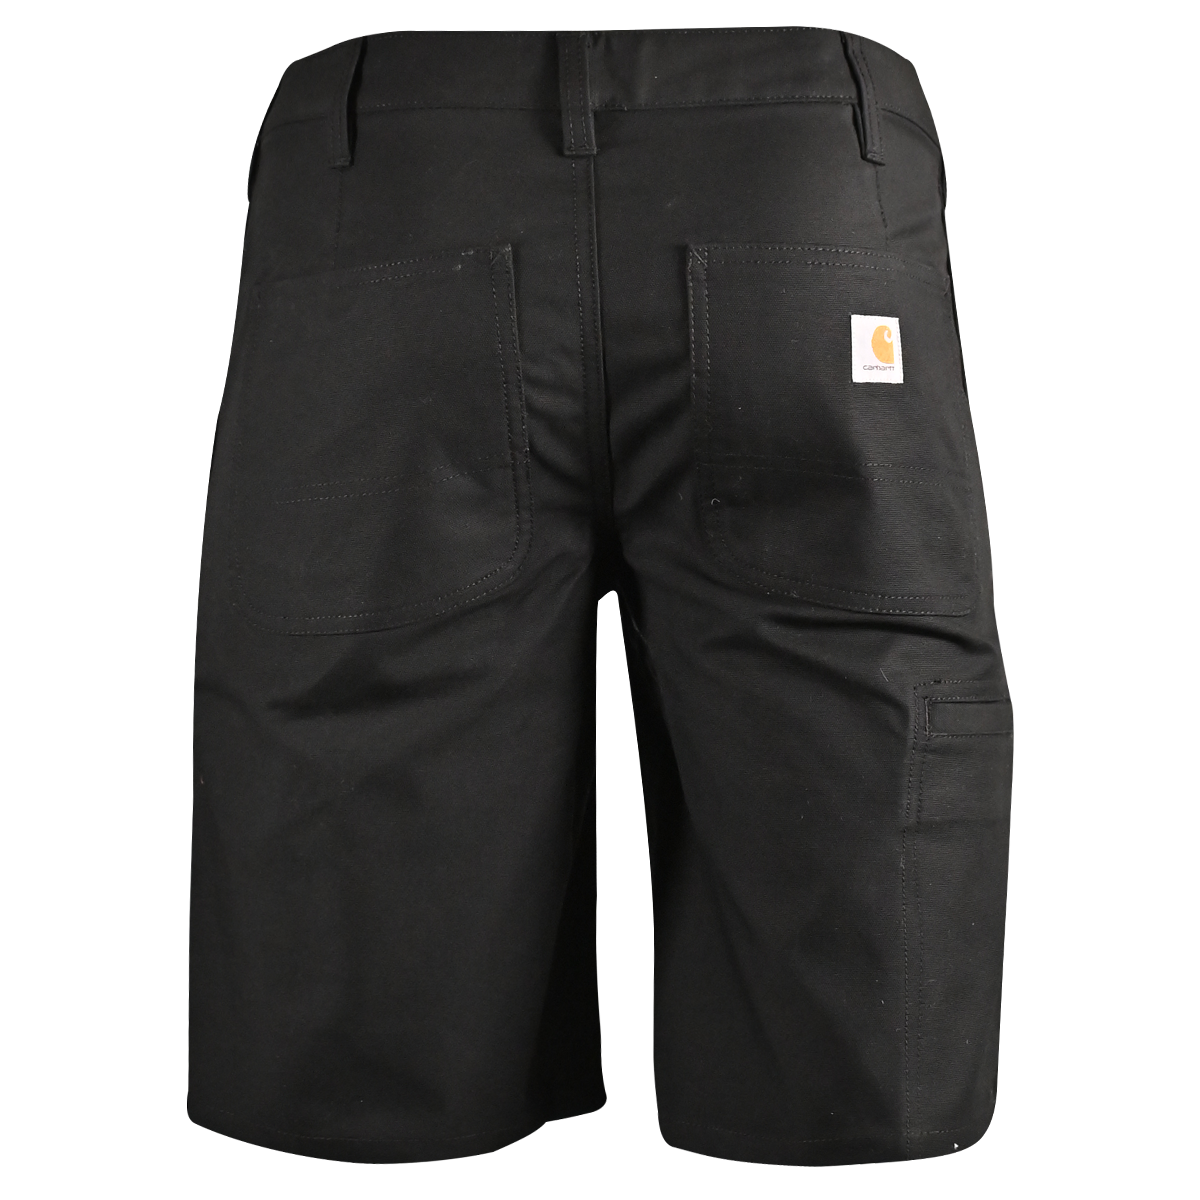 Carhartt Women's Chino Shorts Black Rugged Flex Rigby Relaxed Fit